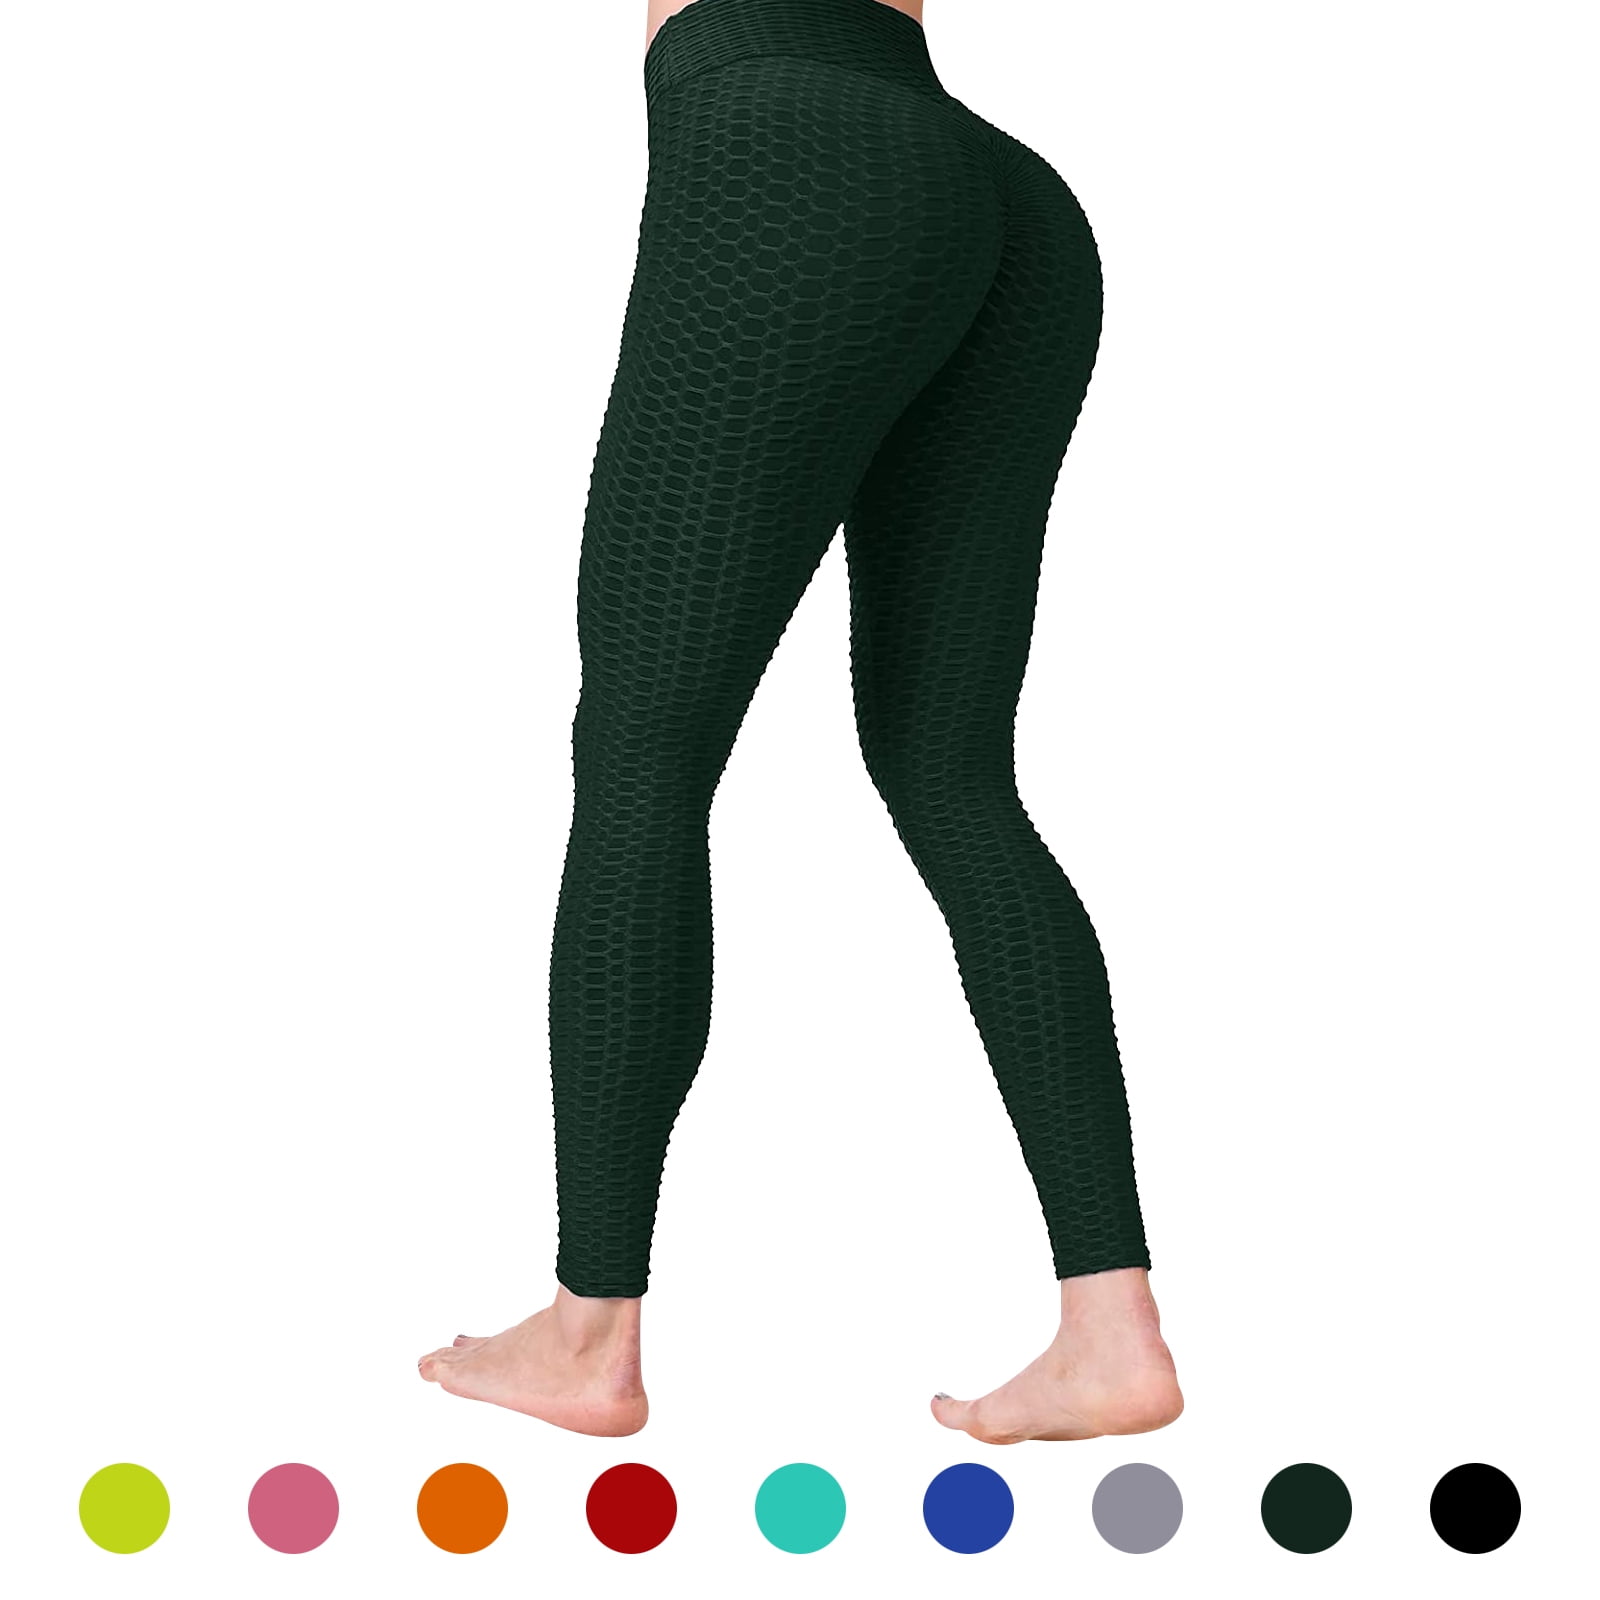  Women's Bubble Hip Butt Lifting Anti Cellulite Legging High  Waist Workout Tummy Control Yoga Tights Ladies Yoga Pants Army Green :  Clothing, Shoes & Jewelry